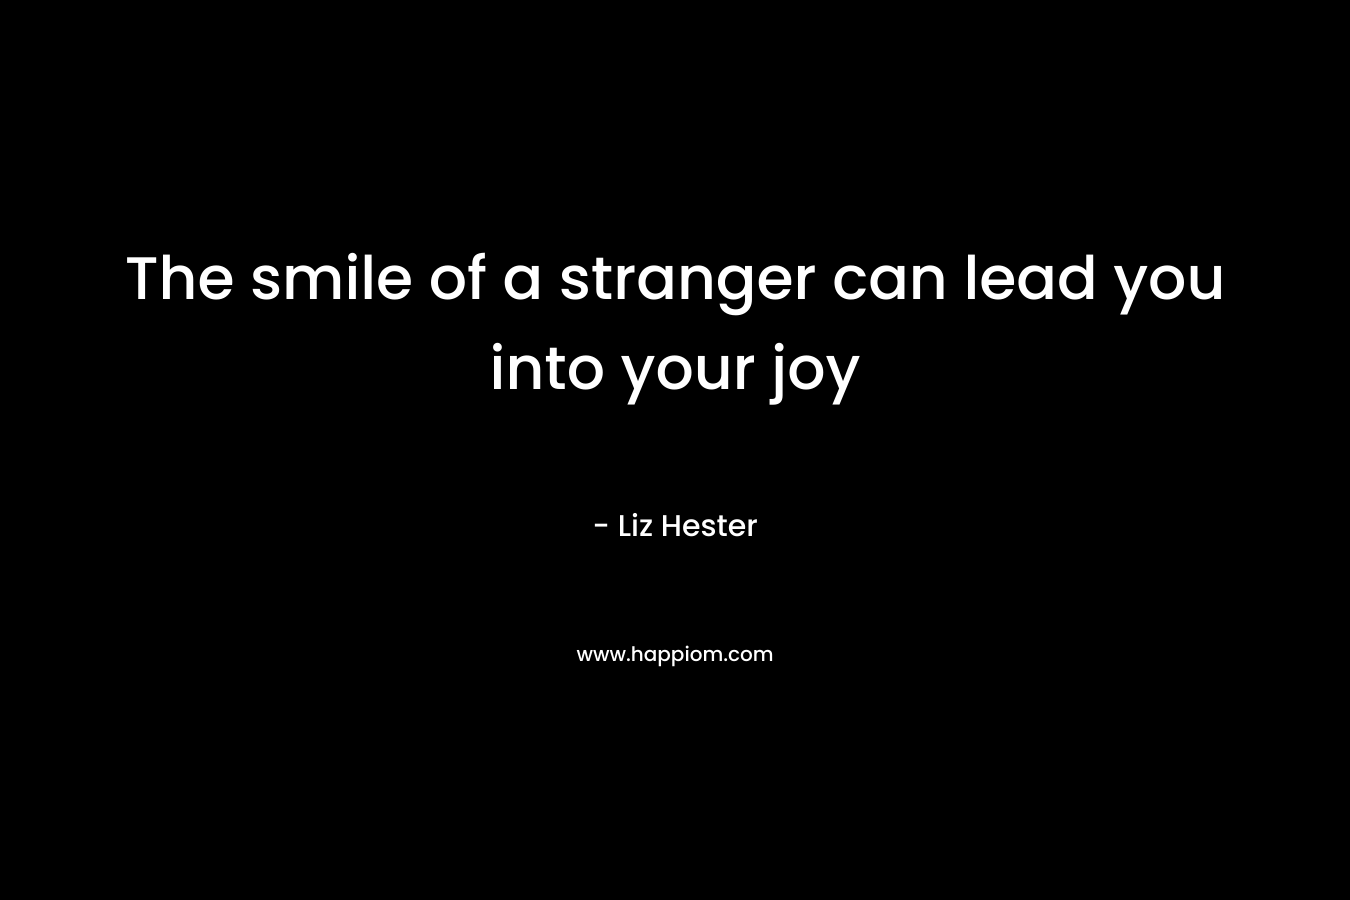 The smile of a stranger can lead you into your joy – Liz Hester